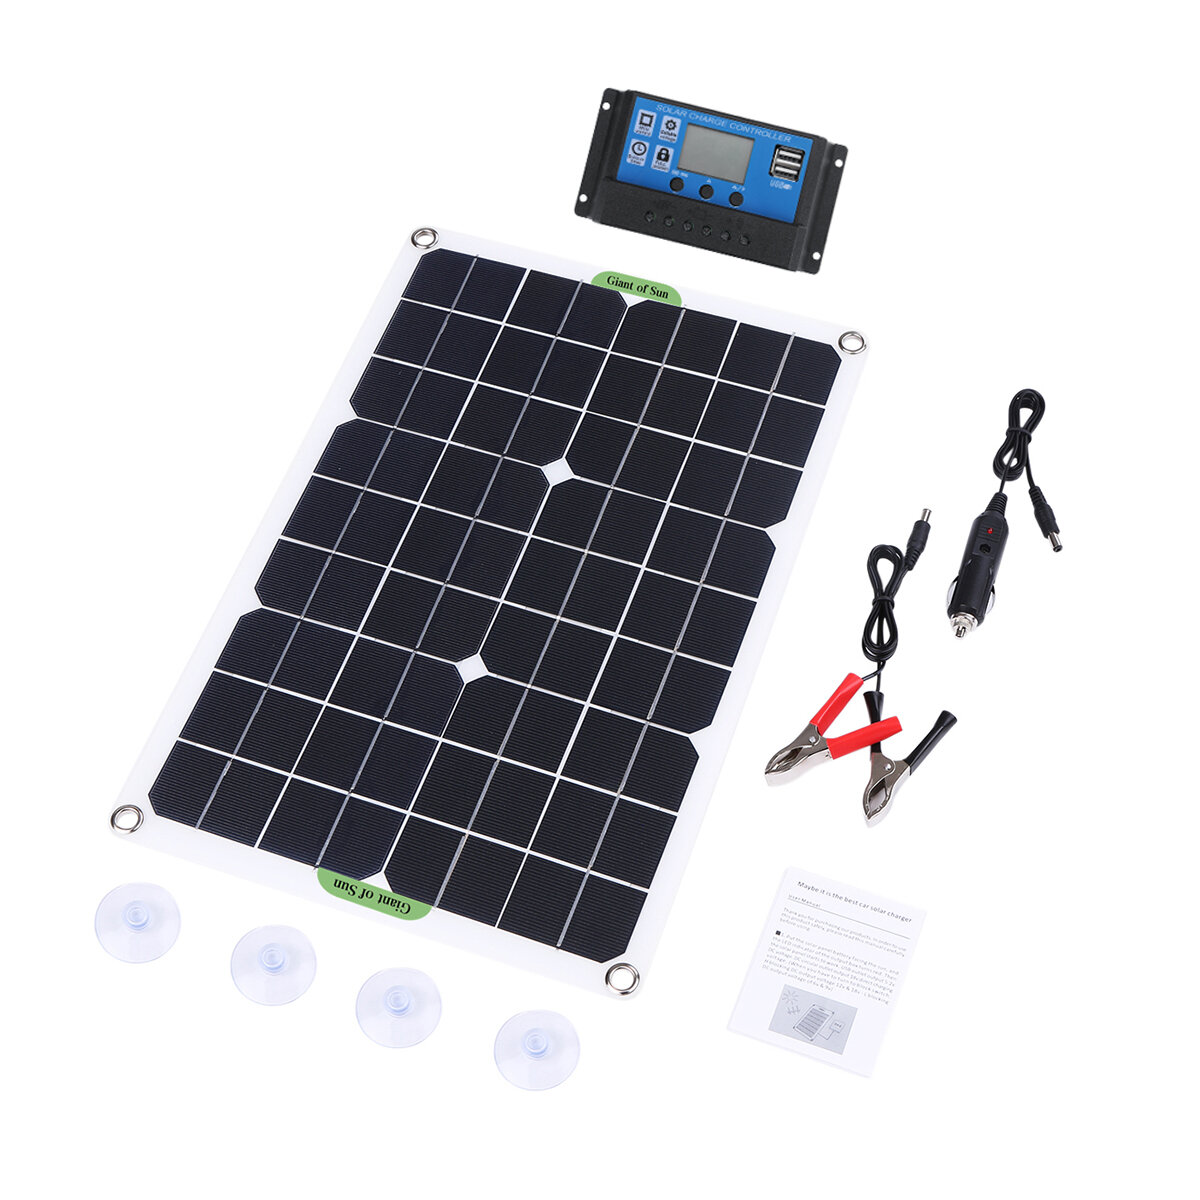 80W Solar Panel Kit Battery Charger Power Bank Camping Travel Generator with Controller